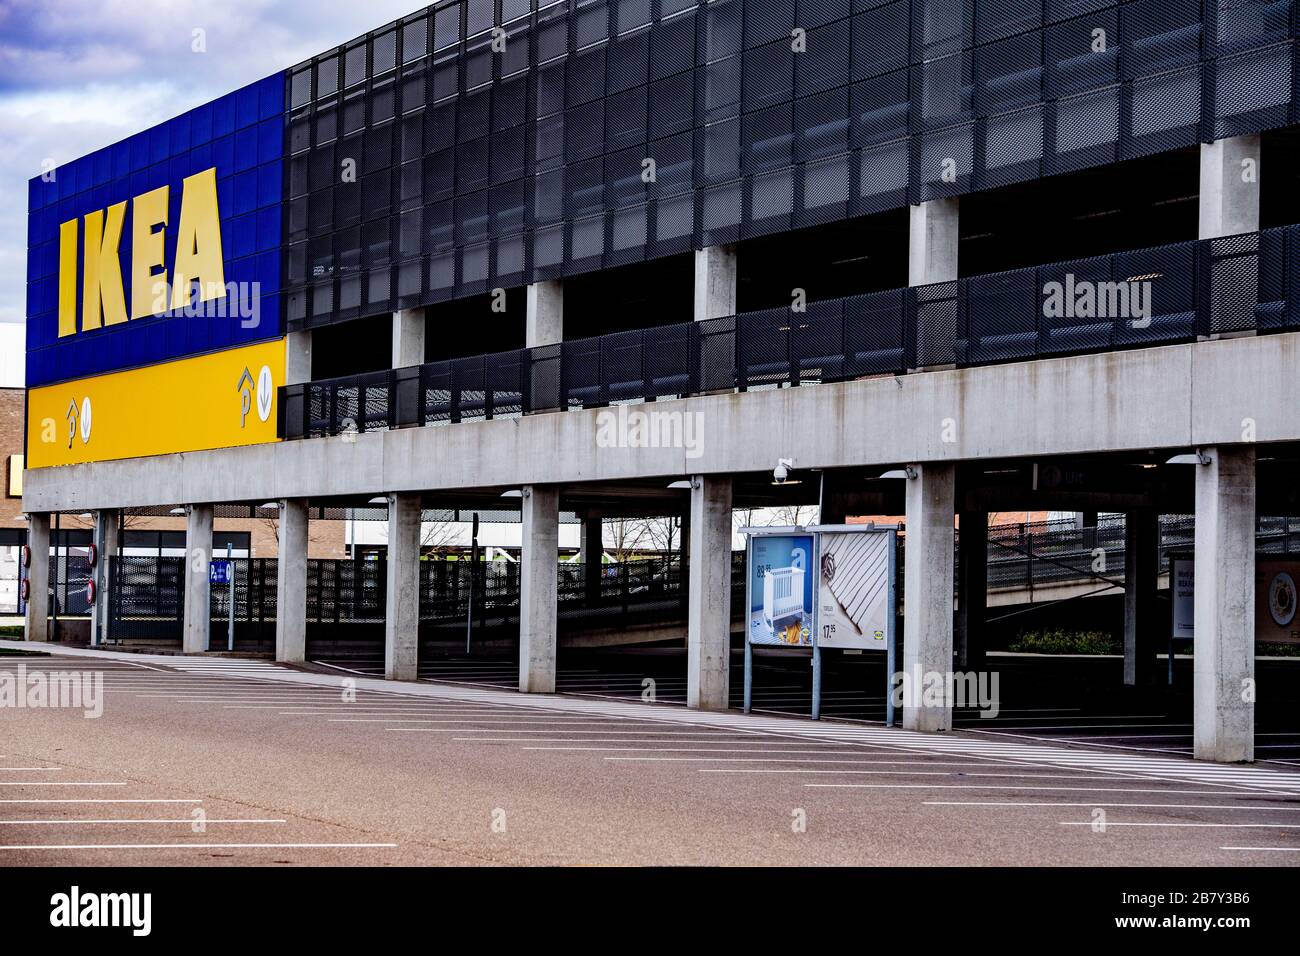 ik zal sterk zijn aanbidden offset An empty parking lot at an IKEA store due to lack of customers as the store  is closed.IKEA is closing all its stores in the Netherlands as the Covid-19  coronavirus is spreading